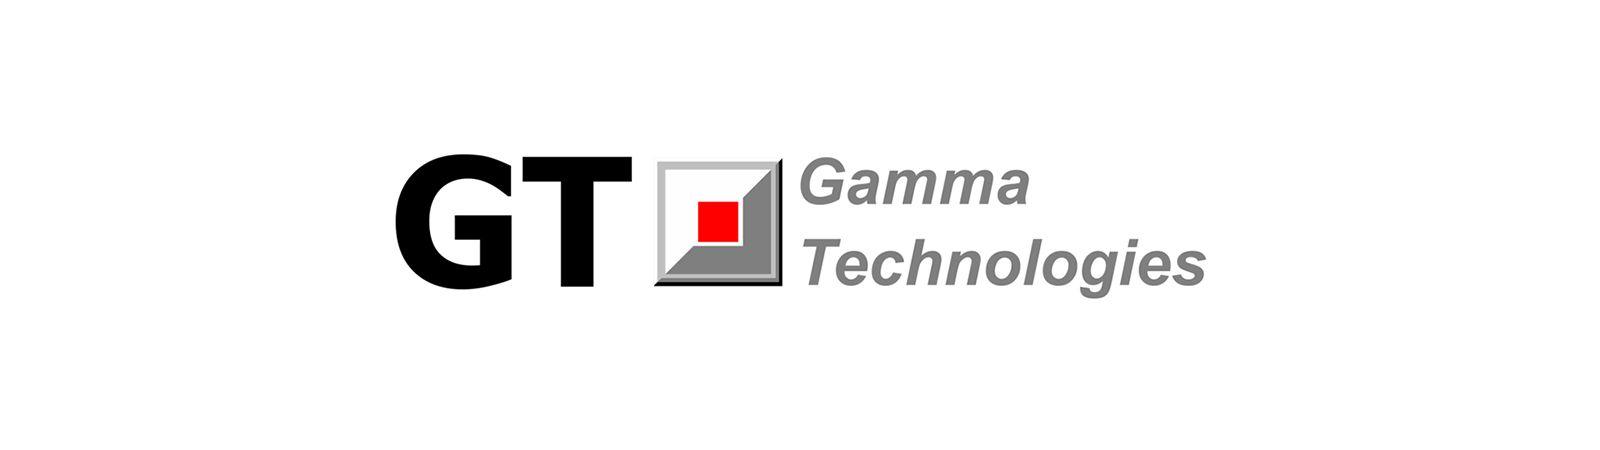 Gamma Line Logo - Gamma Technologies | Technology Sector | TA | A Private Equity Firm